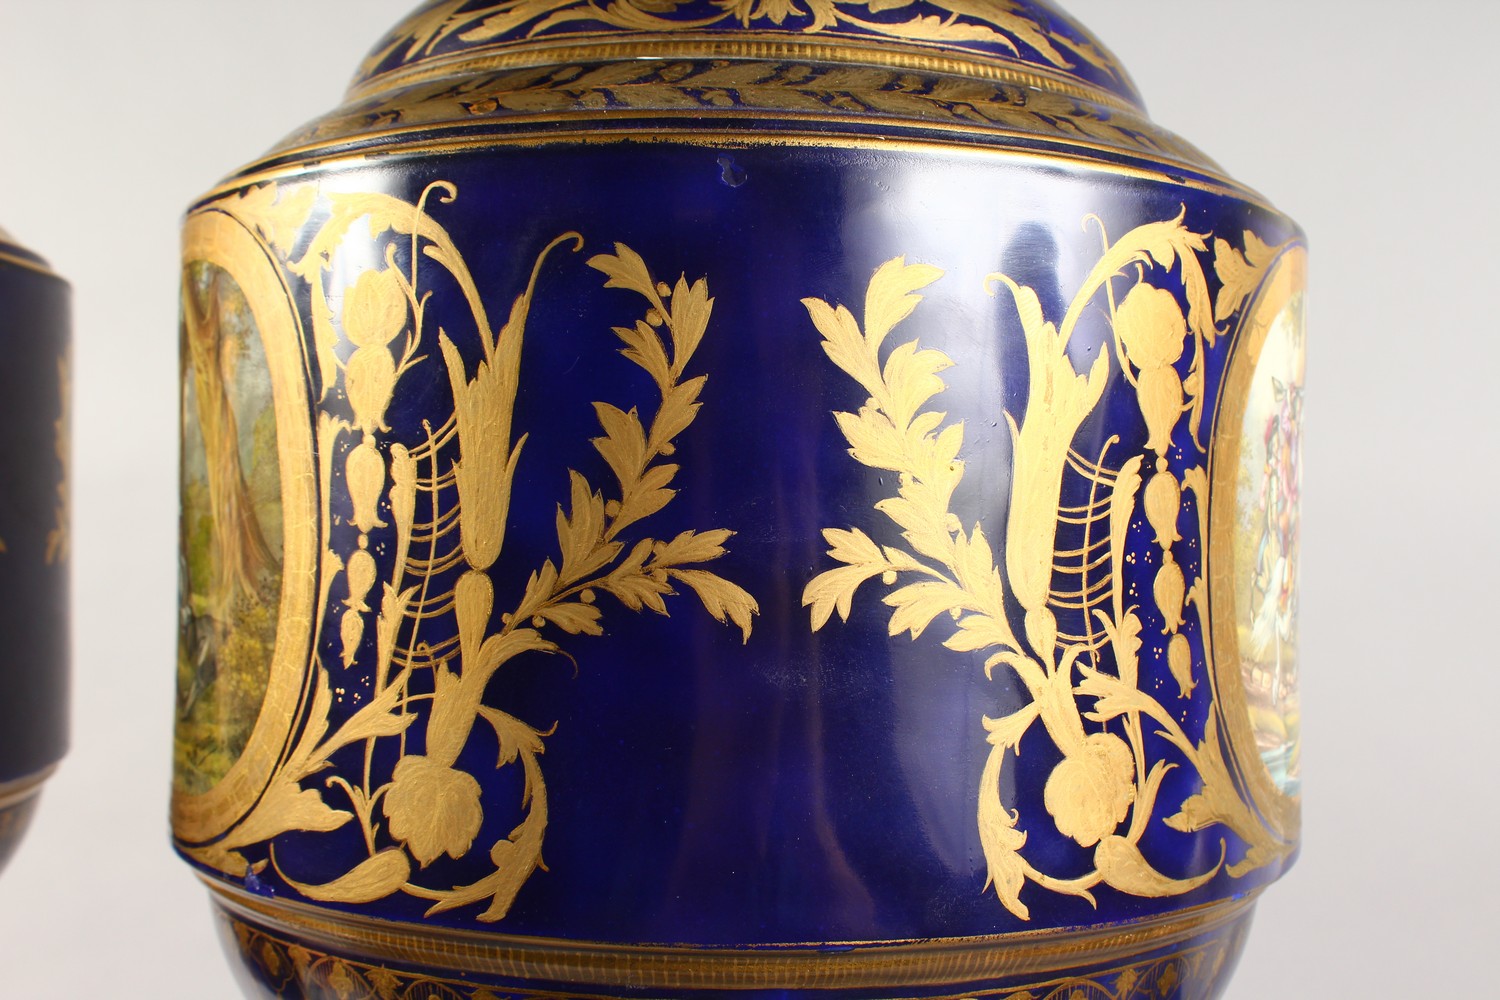 A SUPERB PAIR OF LARGE SEVRES VASES AND COVERS, with rich ormolu mounts and pineapple finials, the - Image 12 of 20